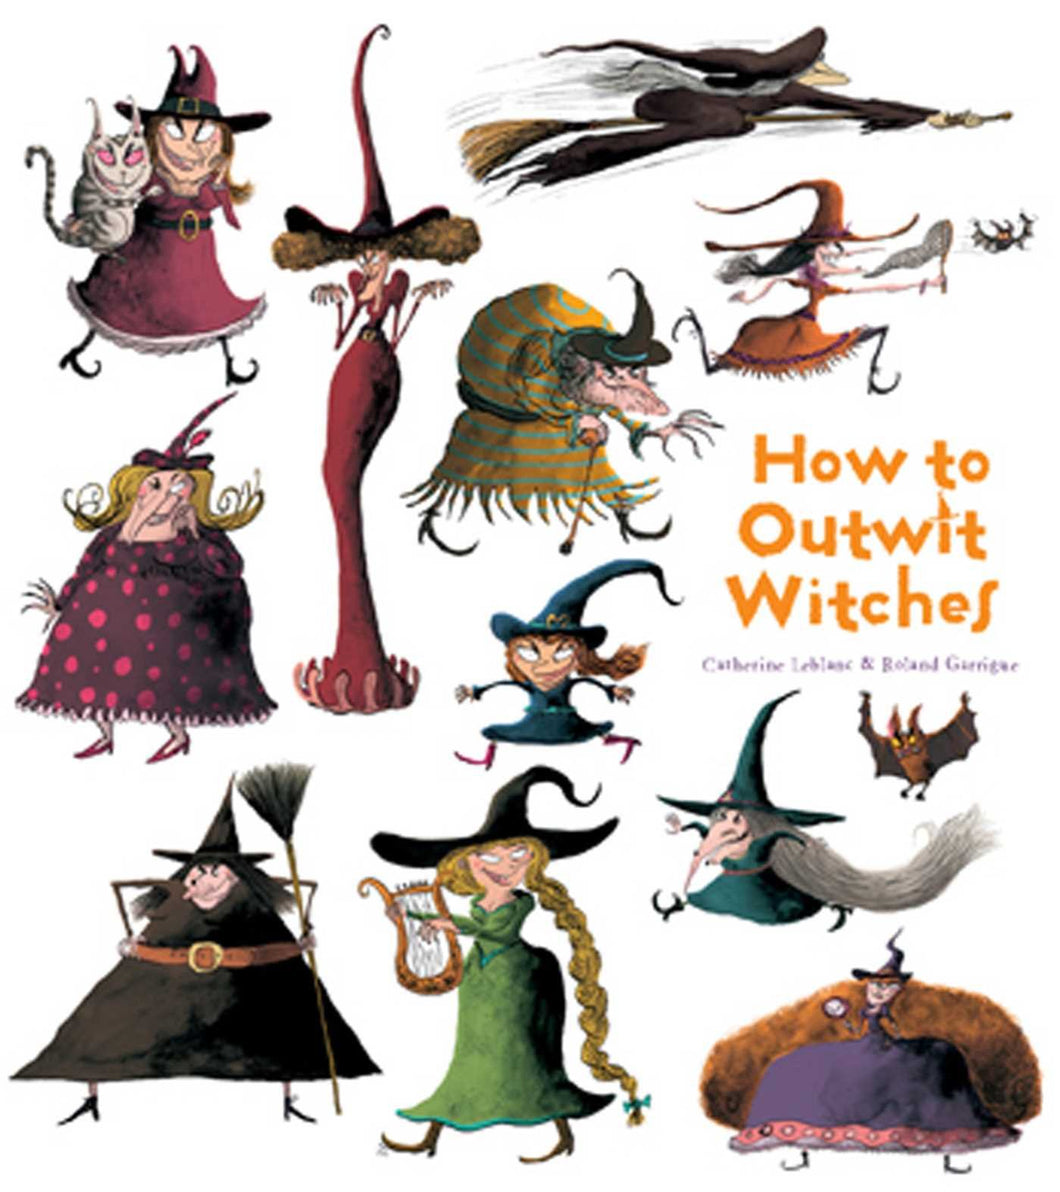 How to Outwit Witches (How to Banish Fears)